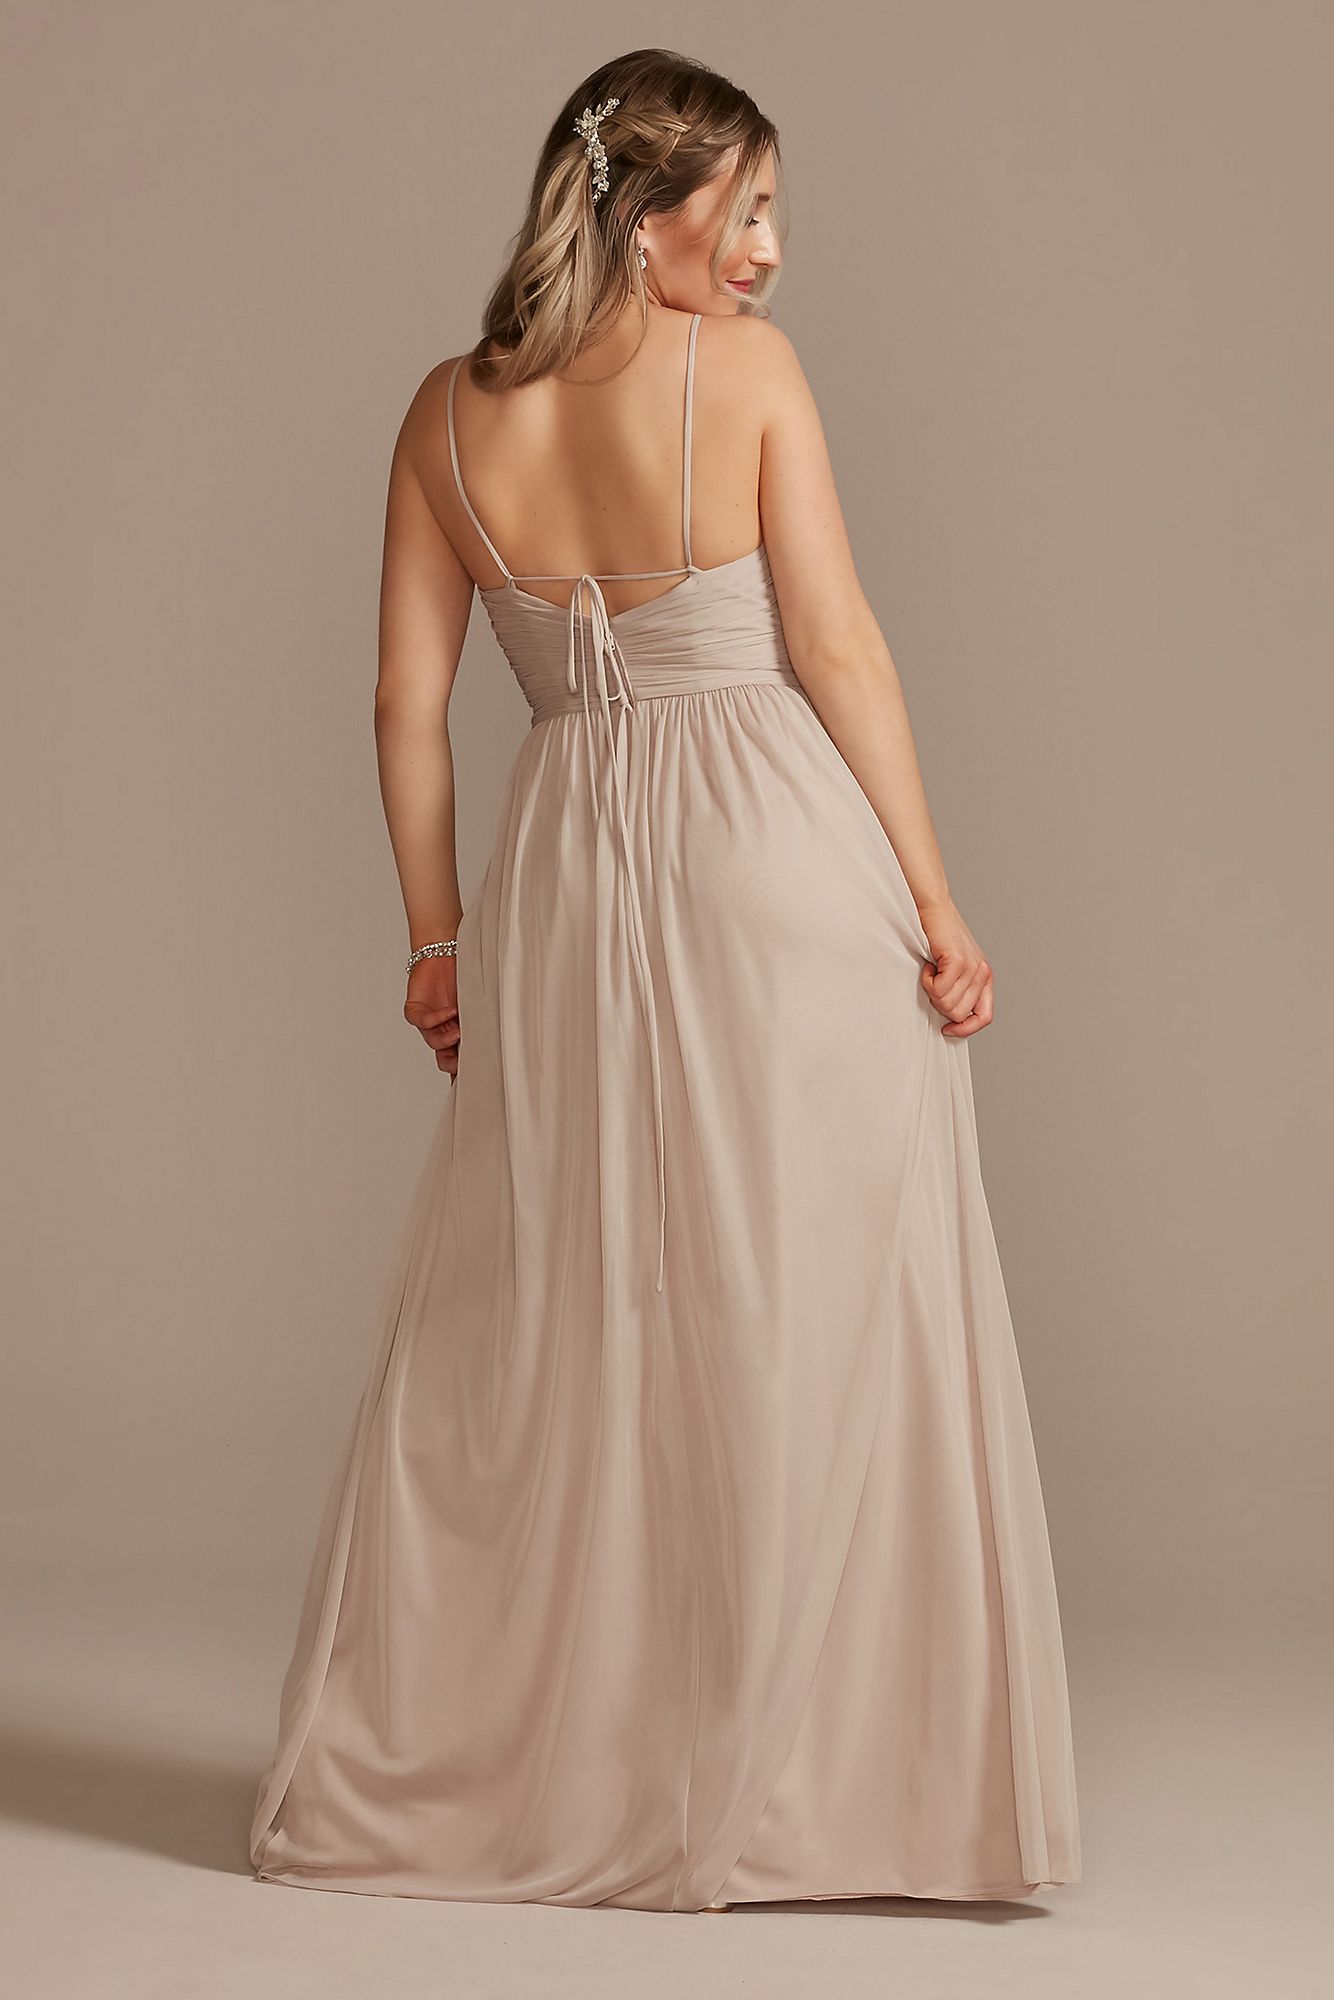 Long Mesh Bridesmaid Dress with Lace-Up Back F20370